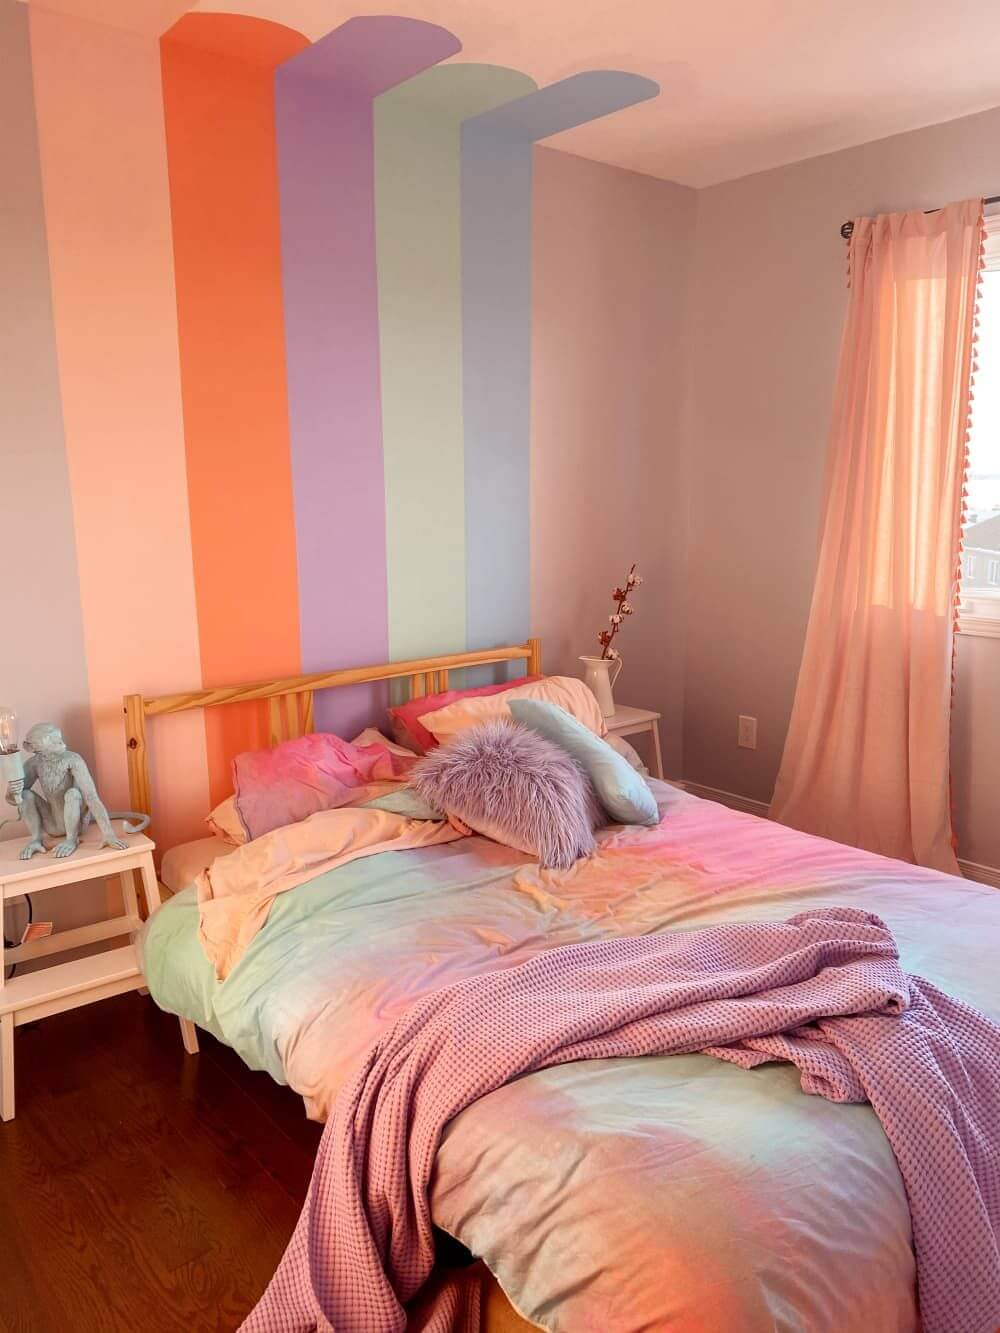 Colorful Bedroom Wall Decor Ideas 